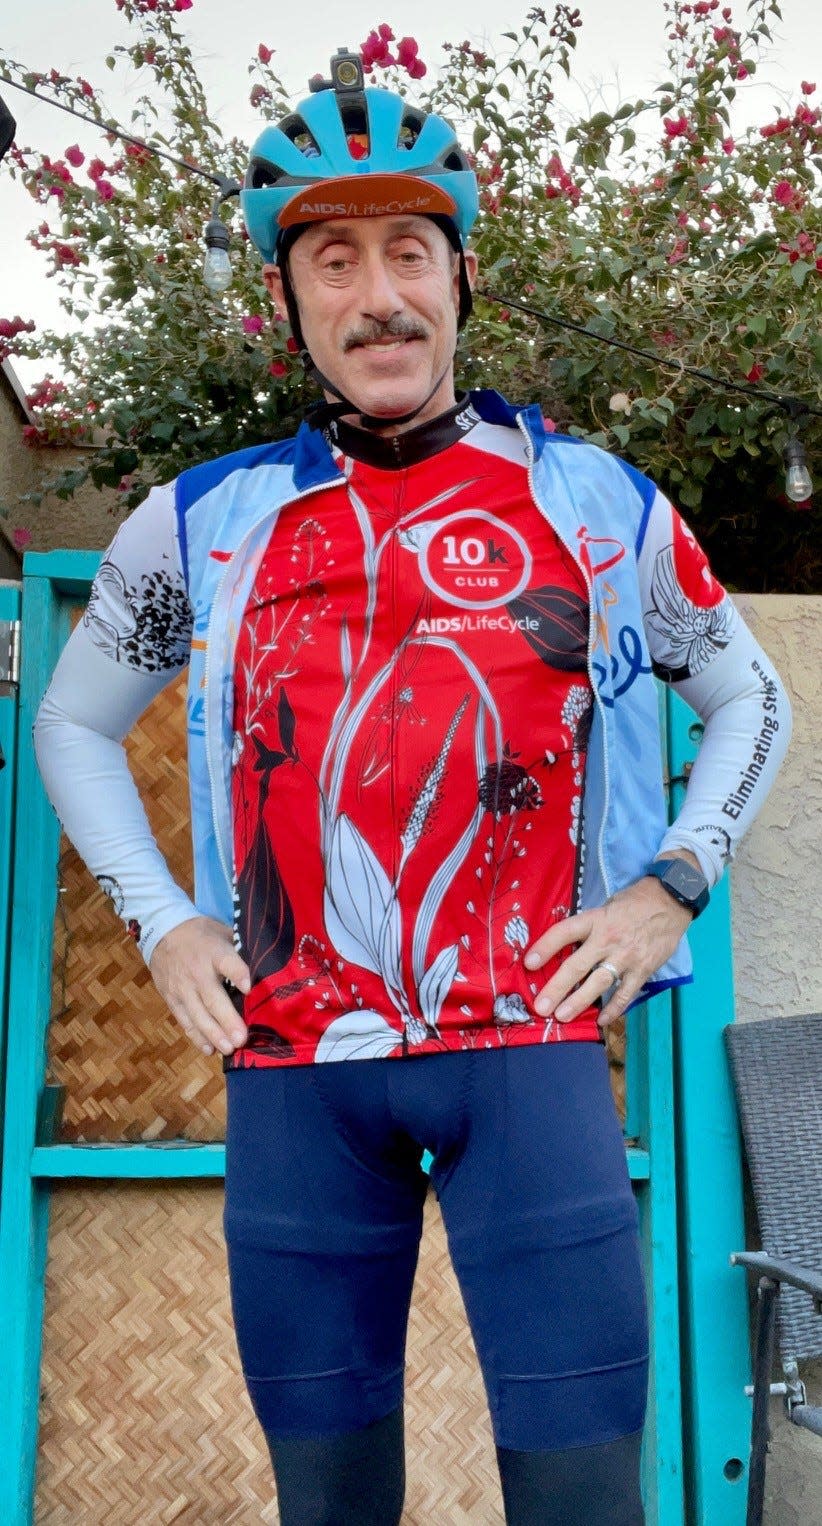 Palm Springs resident Brett Klein will participate in the AIDS/LifeCycle ride from June 5 through 11.